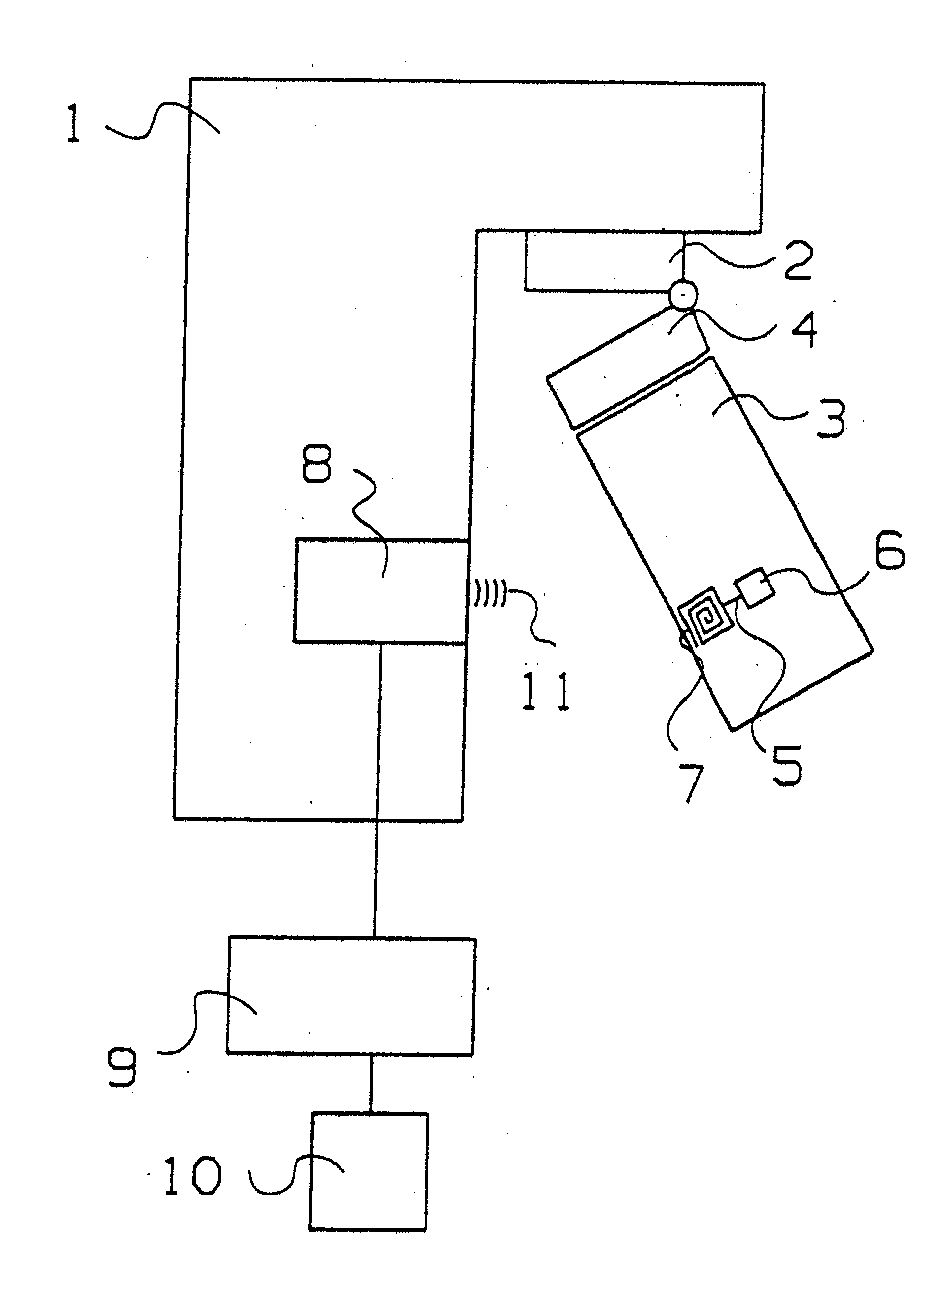 Respirator with a carbon dioxide absorber